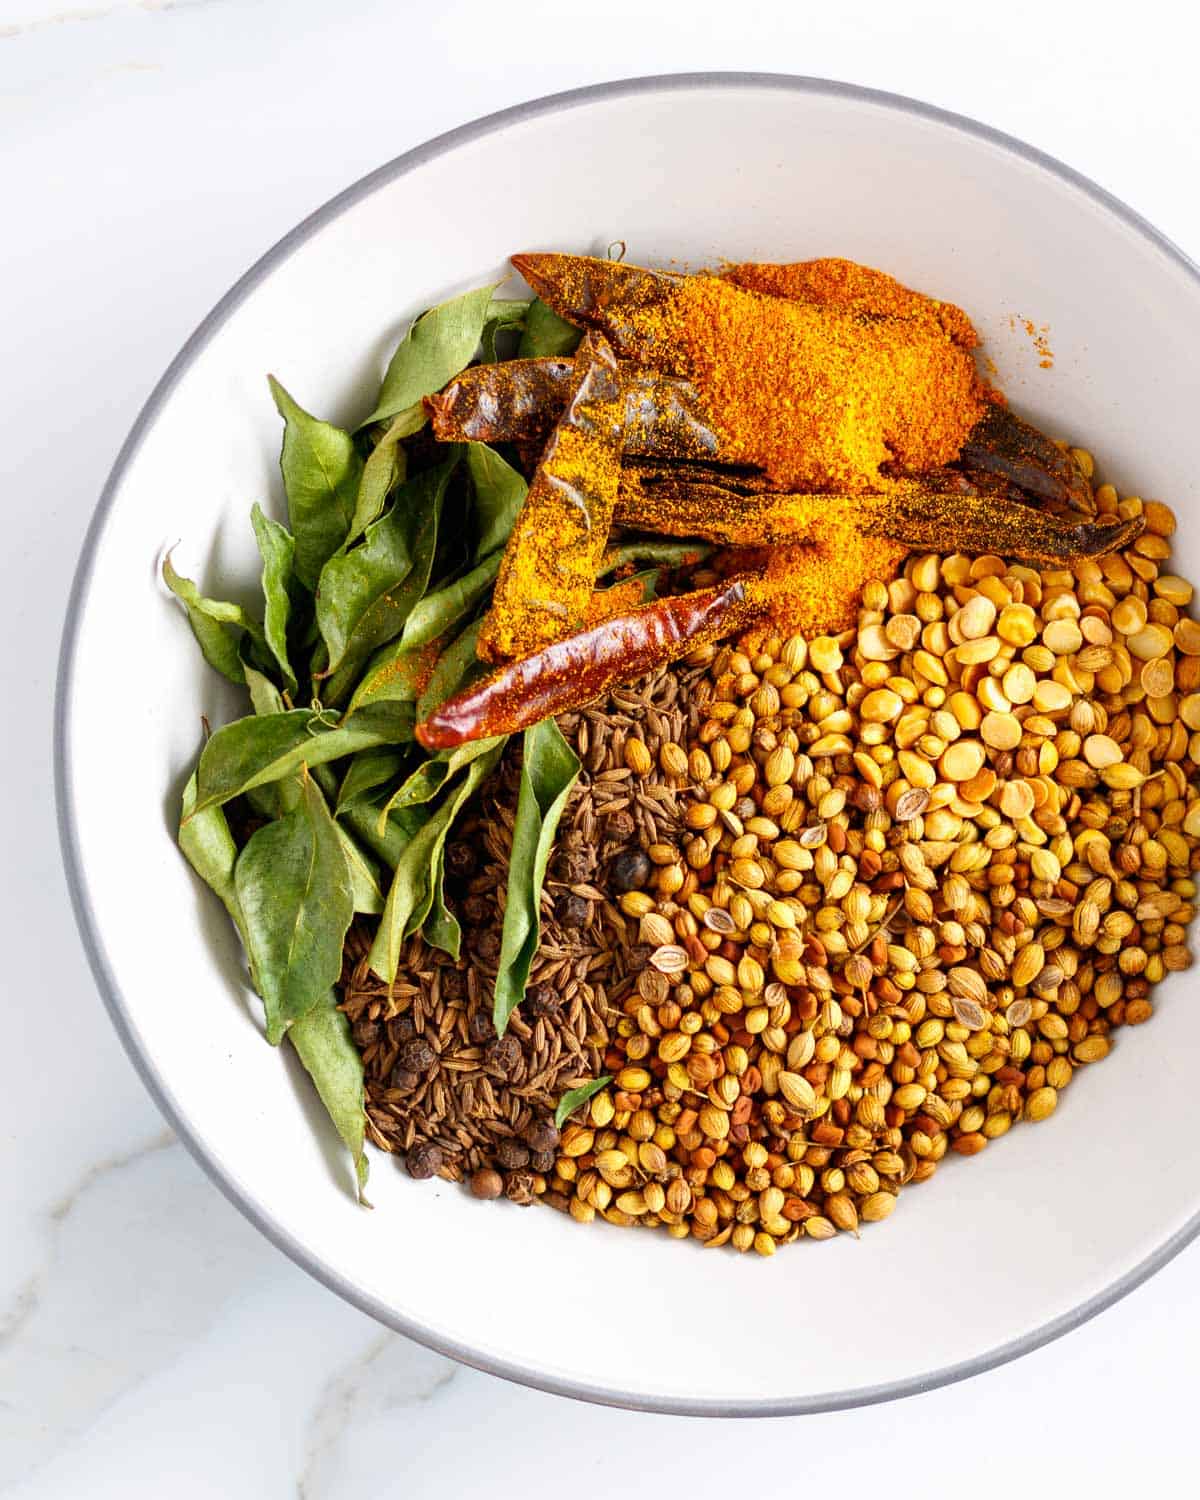 Bowl of toasted Indian spices with chilis and curry leaves.